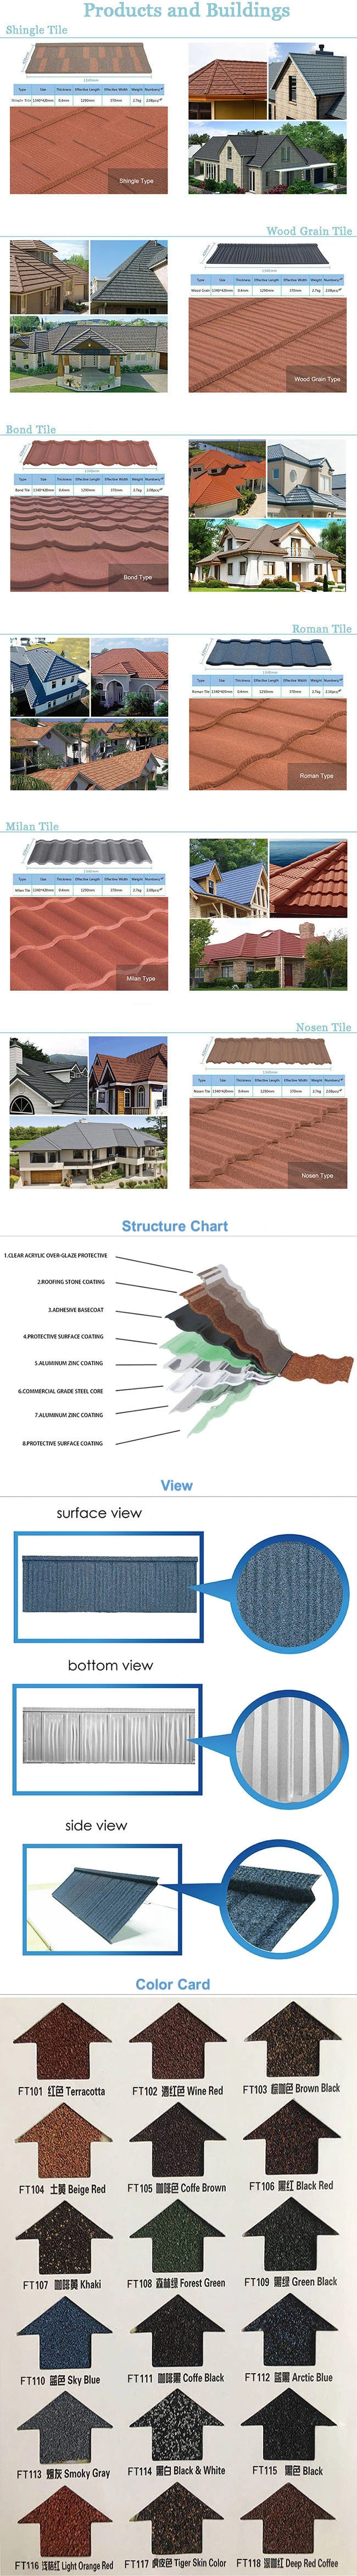 Roof Tile Building Materials Shingles Materials Roofing Sheet Stone Tile